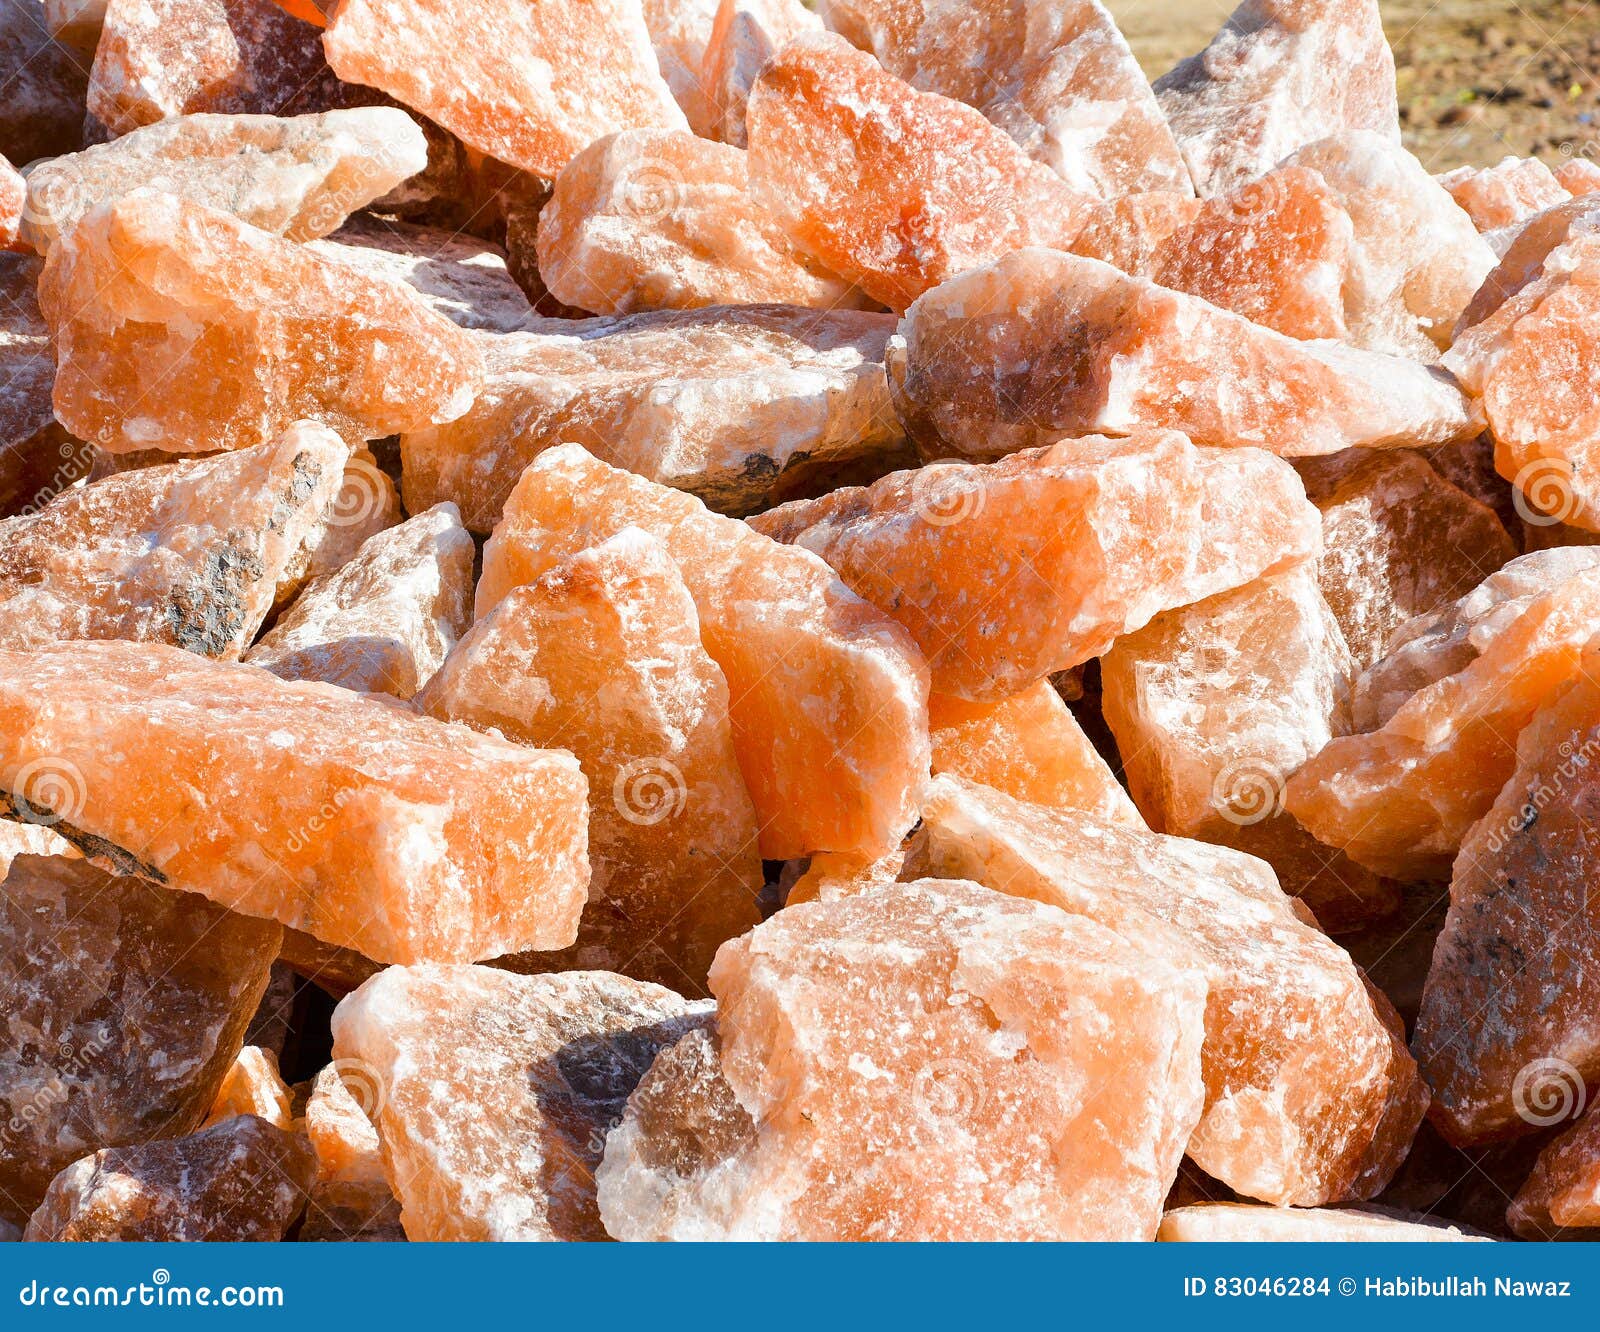 49 383 Rock Salt Photos Free Royalty Free Stock Photos From Dreamstime